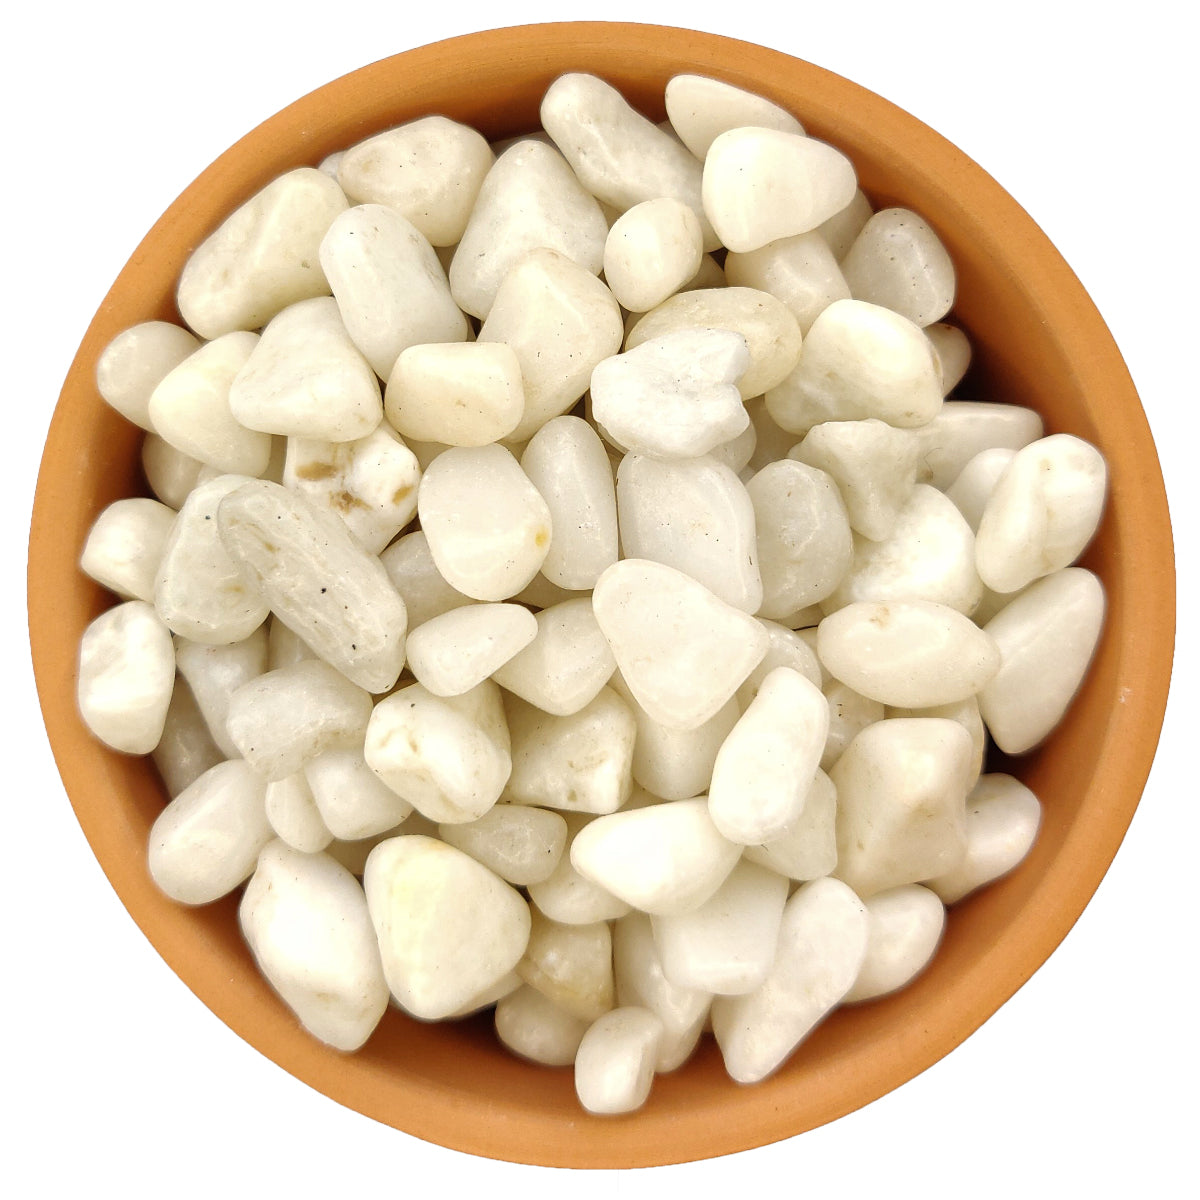 Bean Pebbles Decorative Pebbles for sale, Landscapes DIY Minigarden, Assorted Size Rocks For Landscaping Backyards, Pools, Crafts Or Wedding,  white pebbles for landscaping